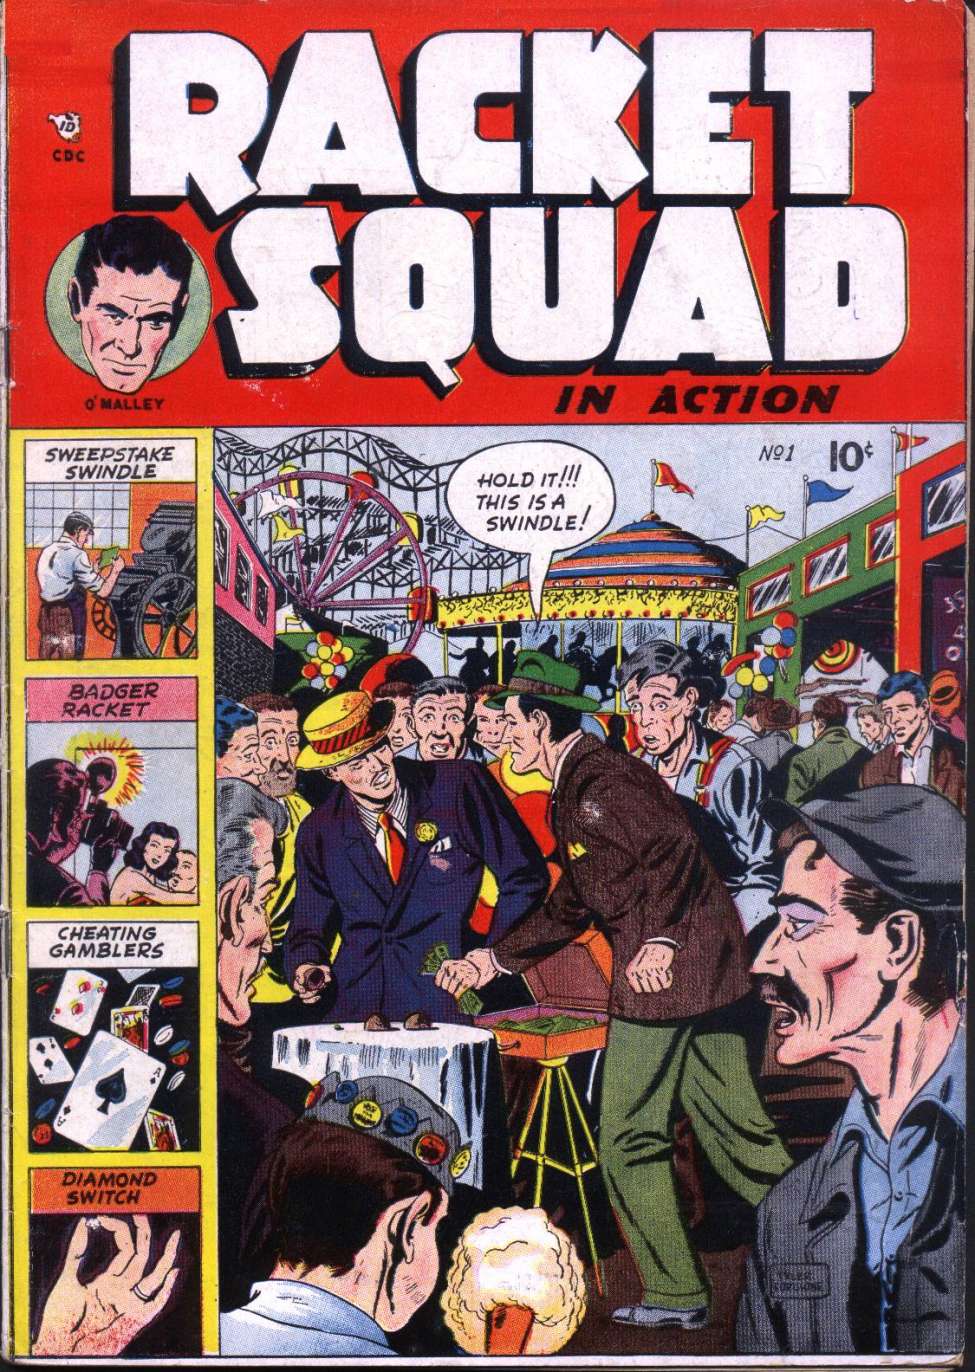 Book Cover For Racket Squad in Action 1